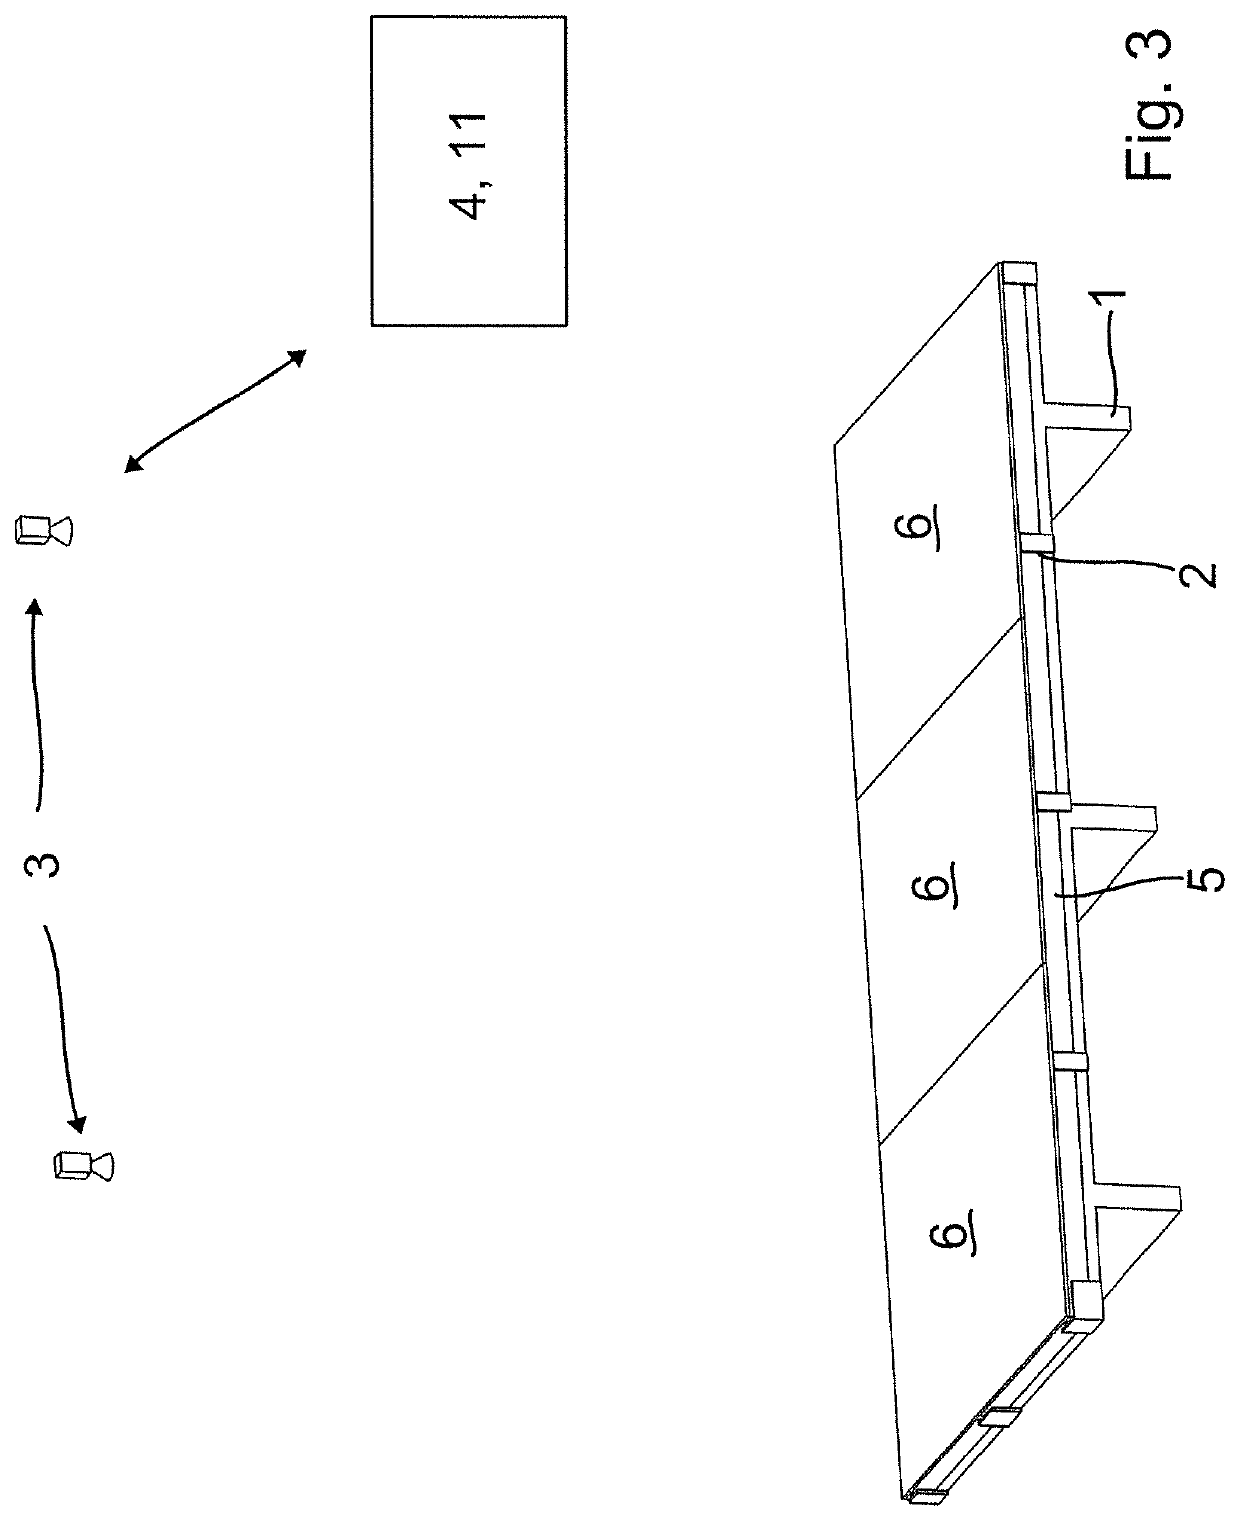 Process for manufacturing wall elements from nailable and/or stapleable materials